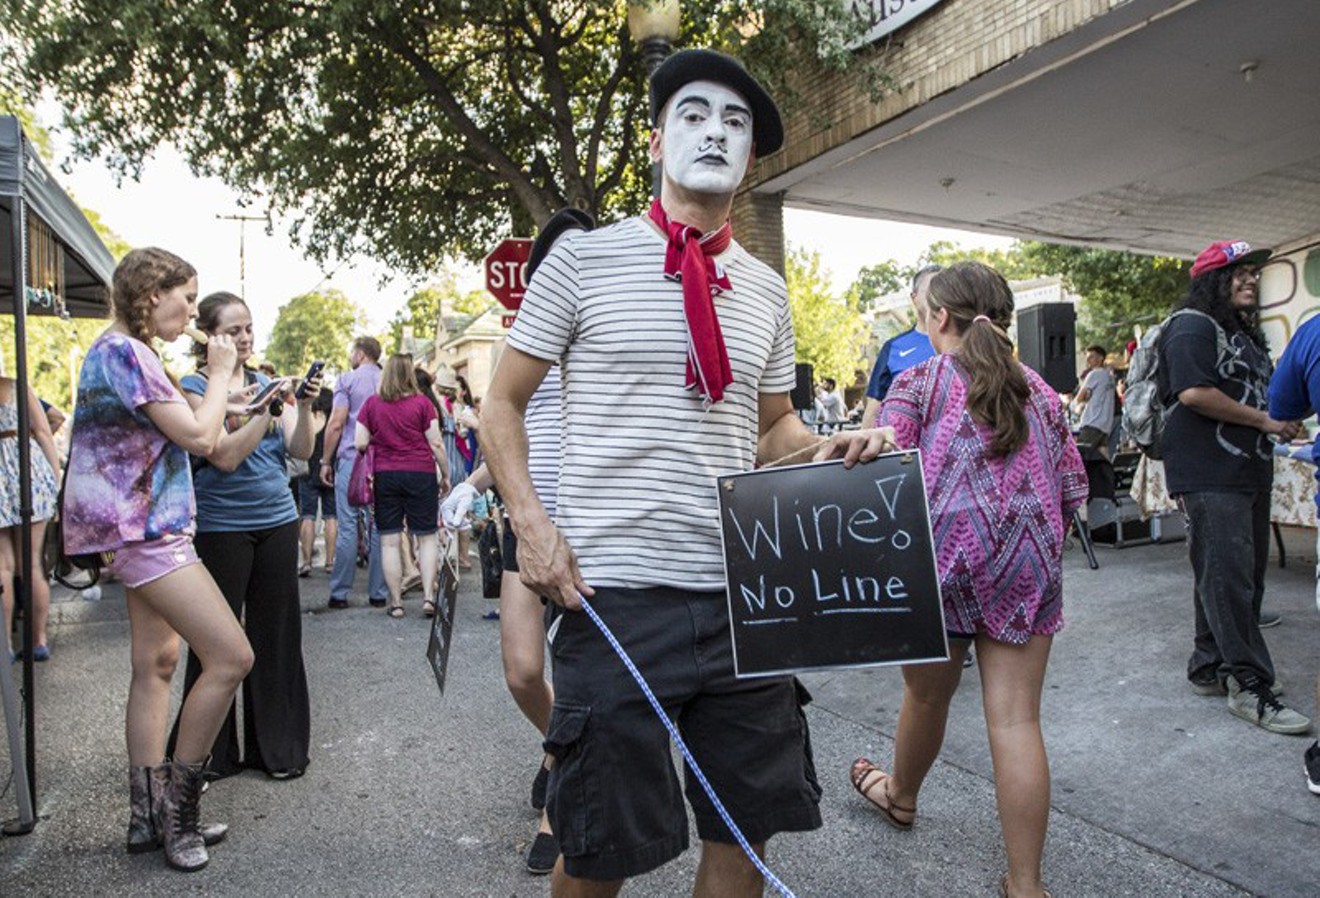 Bastille Day takes over Bishop Arts again this weekend with ample food, wine and more mimes than you can shake a stick at.